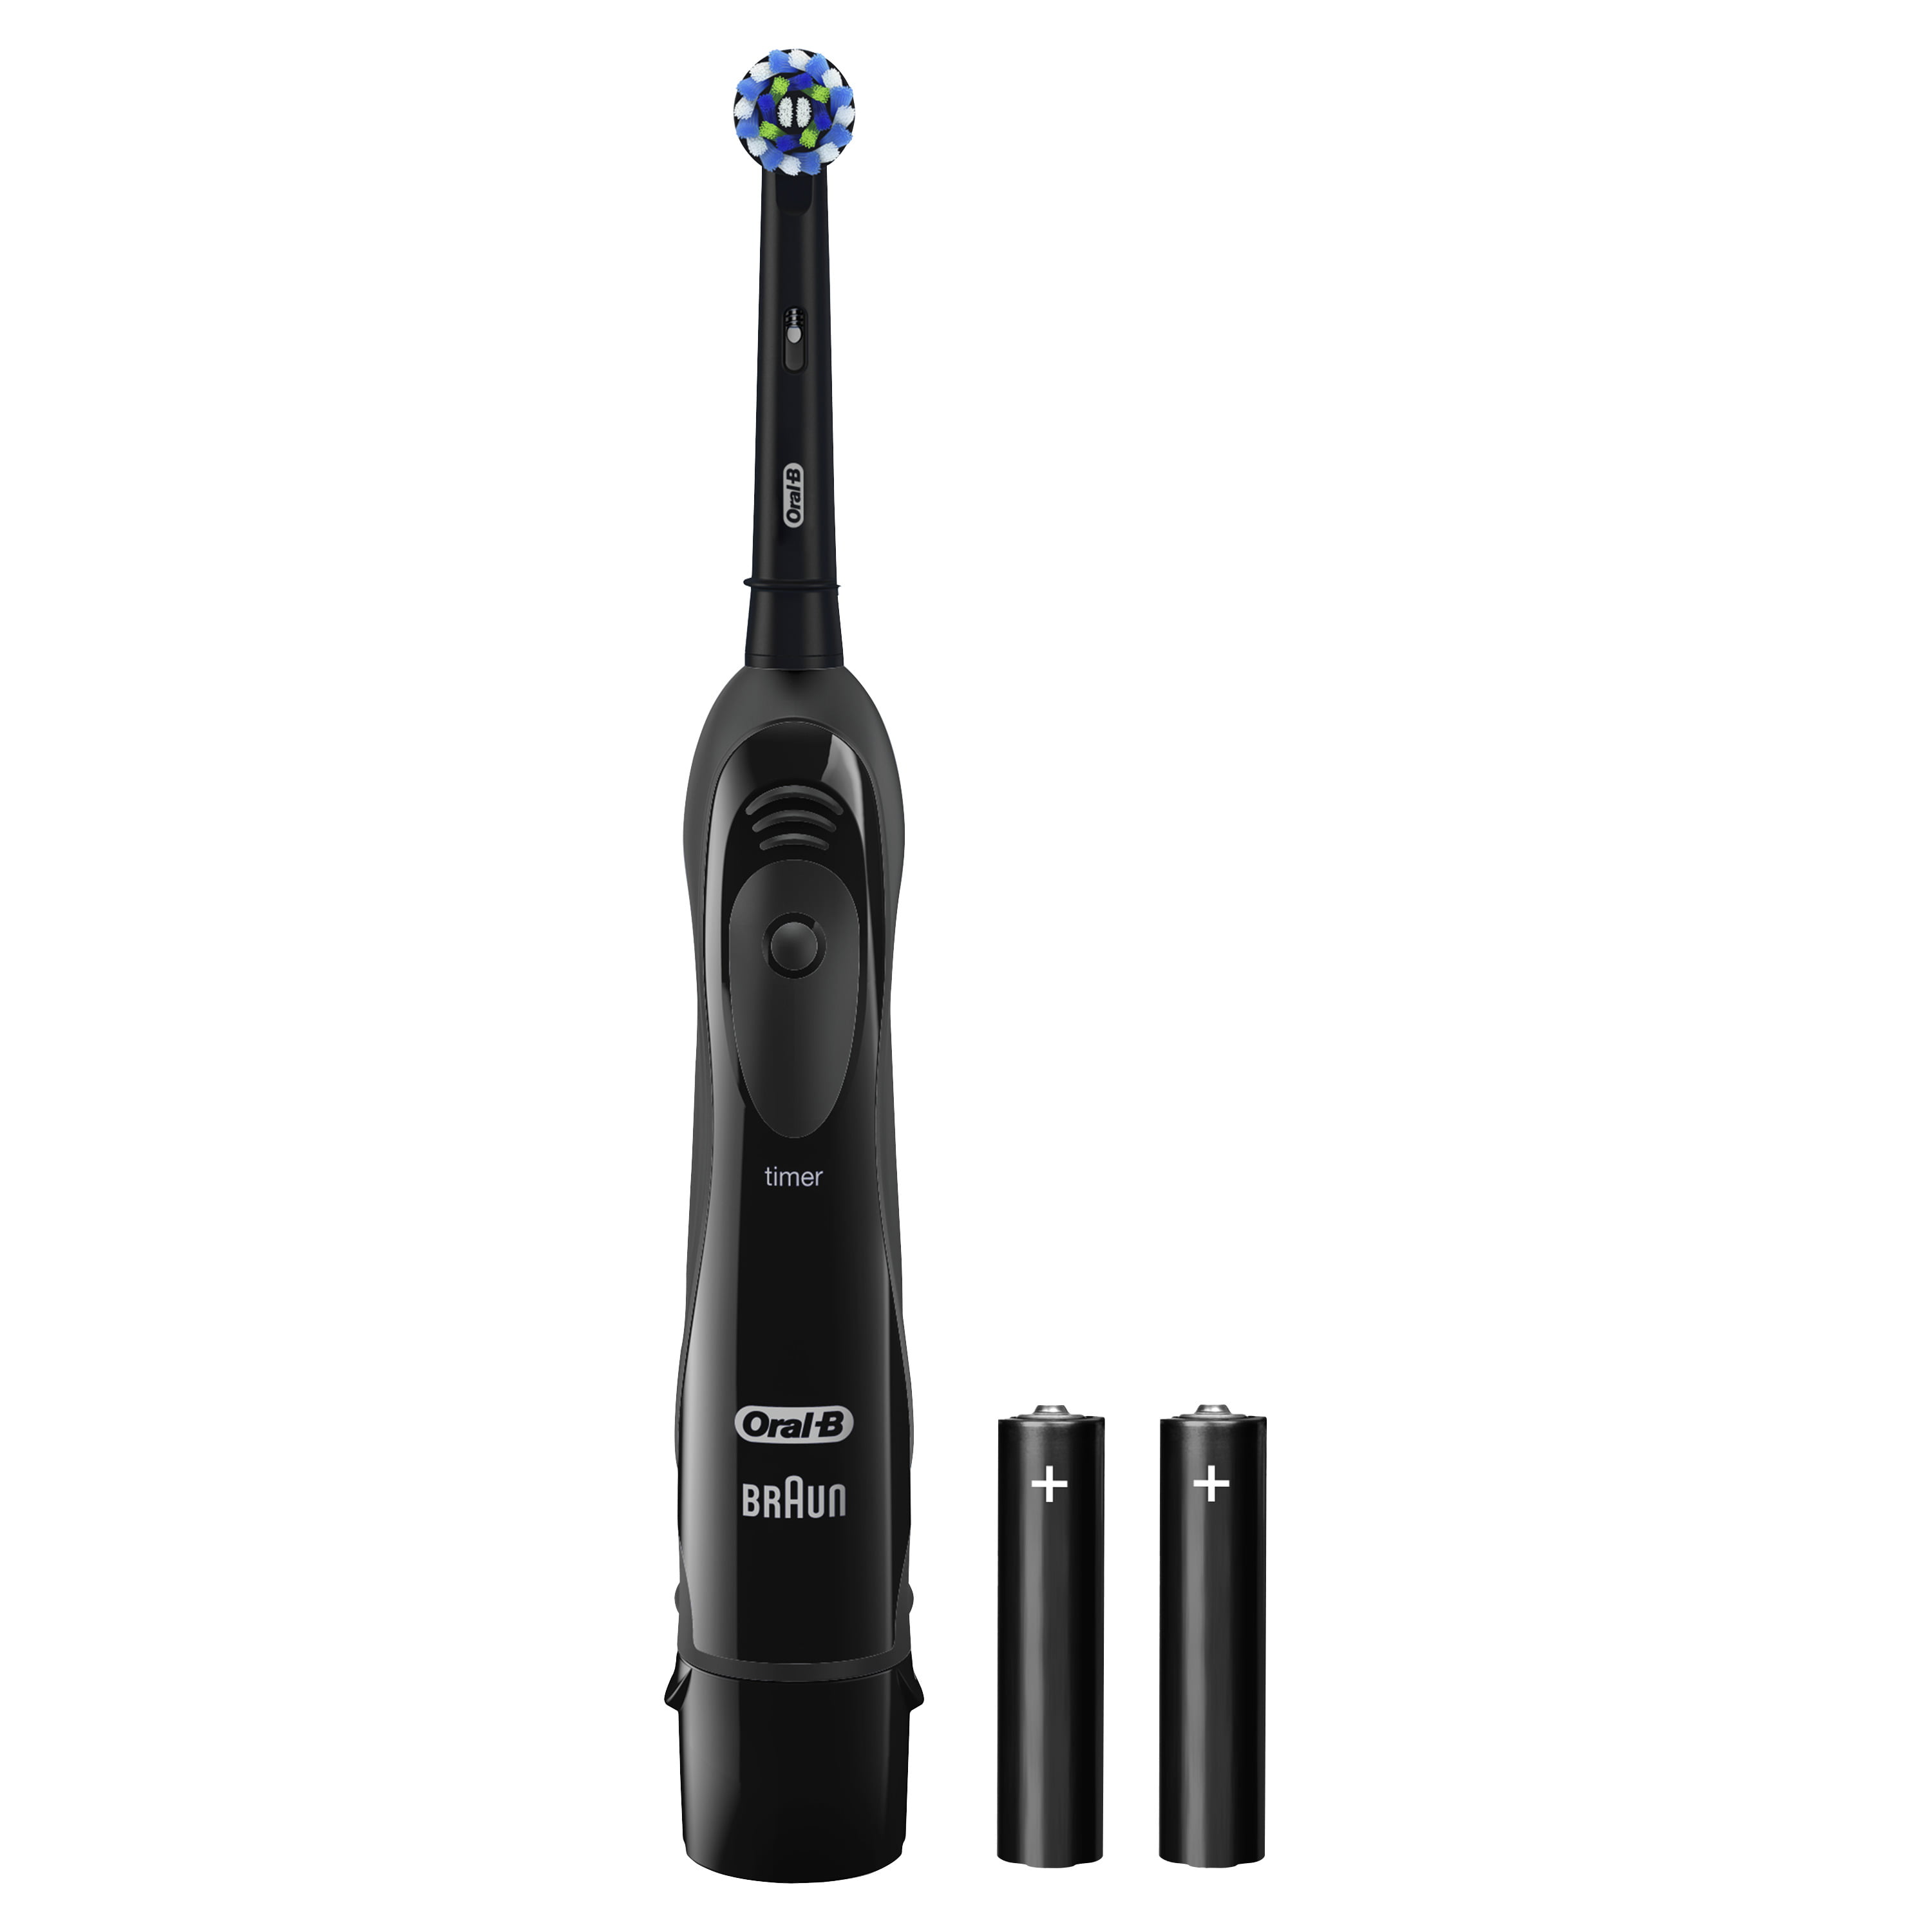 oral-b-pro-health-clinical-battery-electric-toothbrush-black-walmart